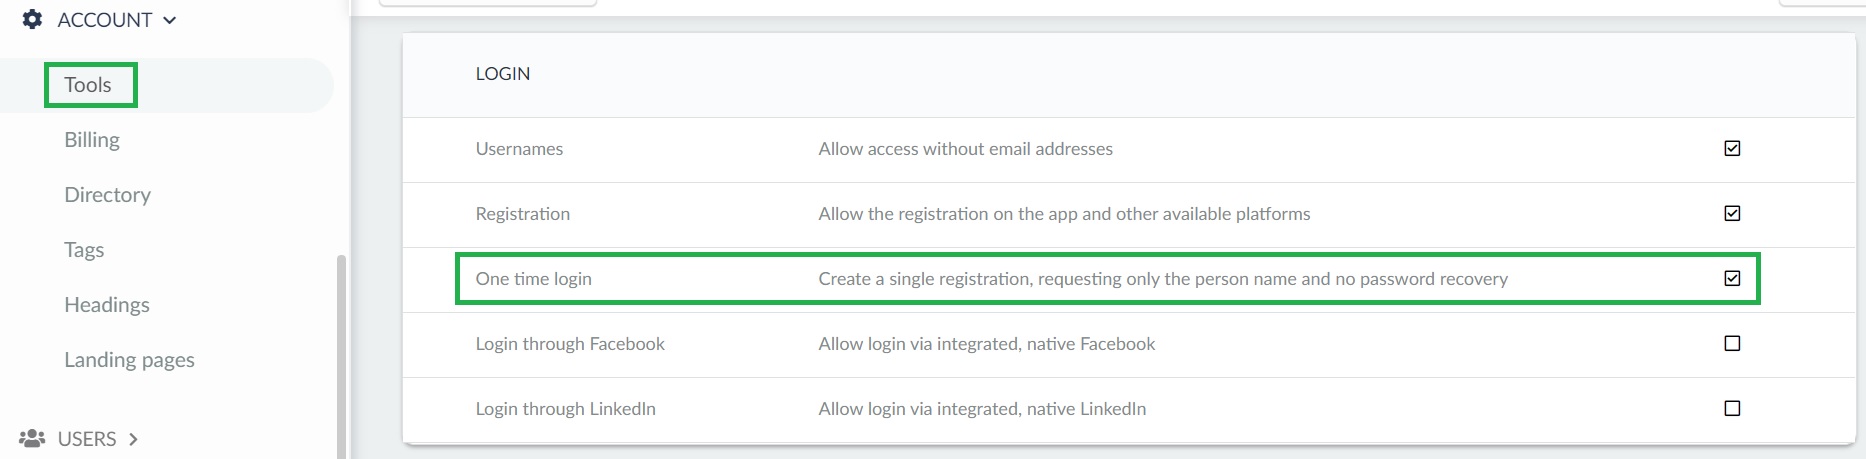 How to enable One time login